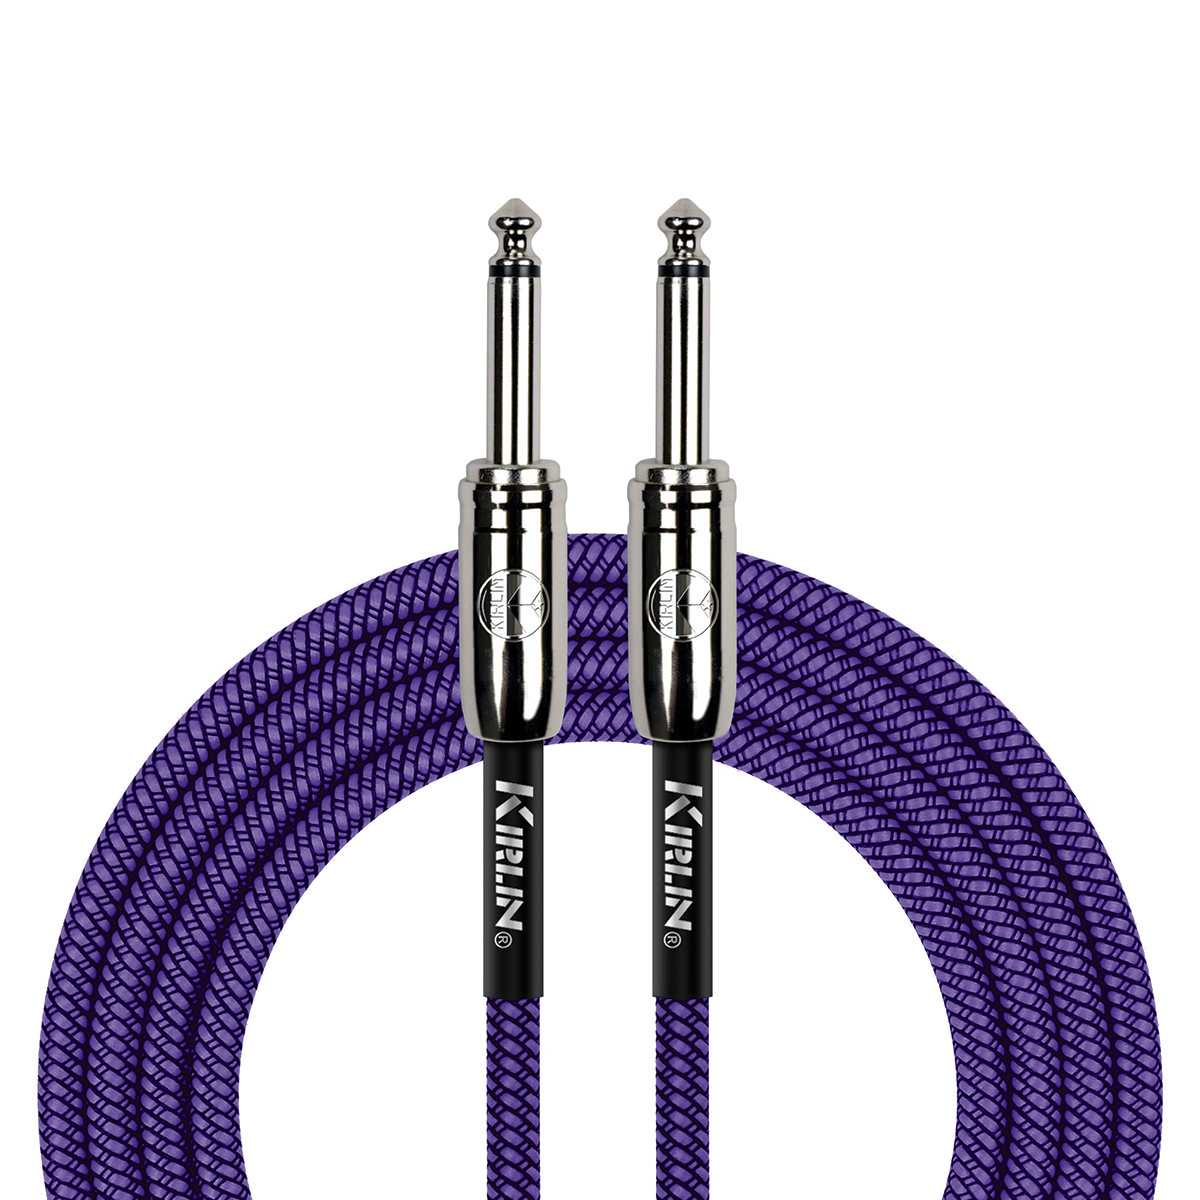 KIRLIN 20FT WOVEN INSTRUMENT CABLE - PURPLE